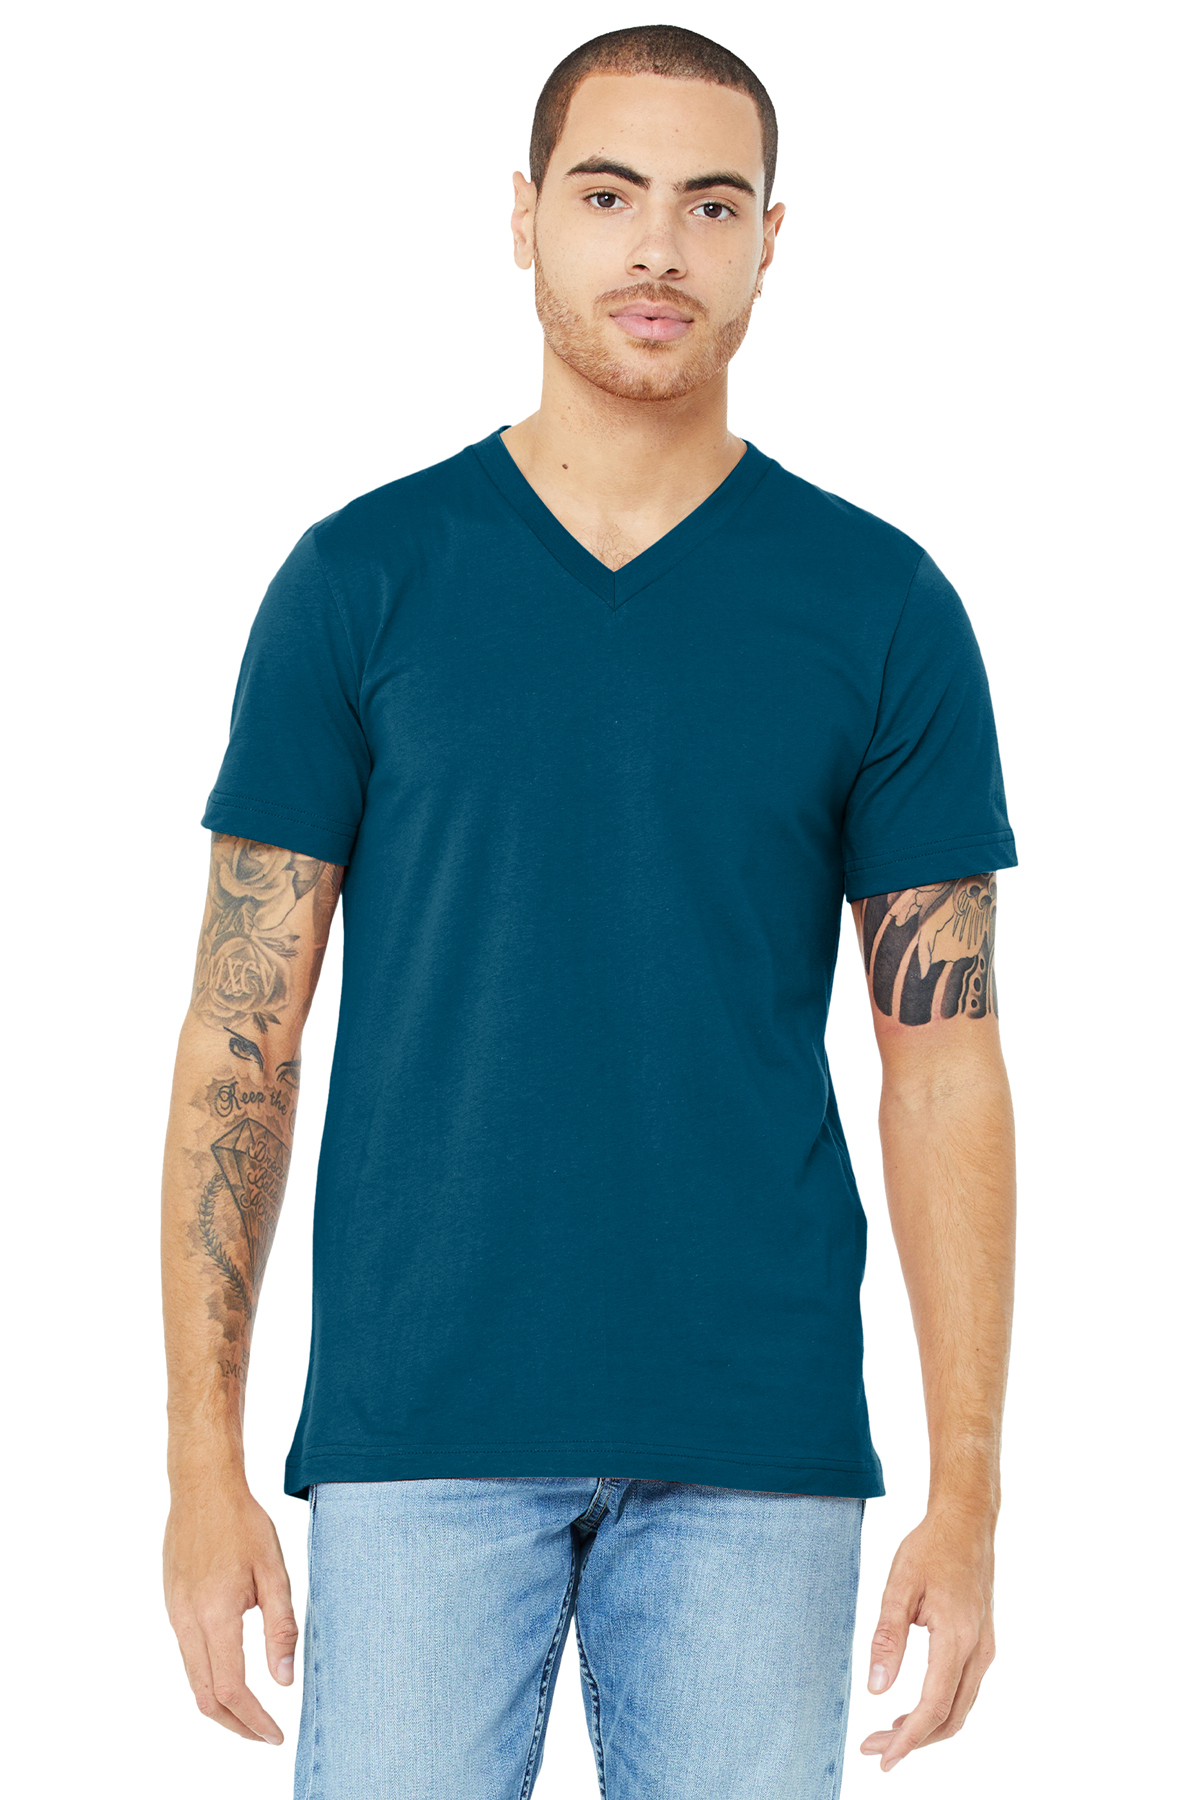 Details about   BC3005 BELLA+CANVAS Unisex Jersey Short Sleeve V-Neck Tee